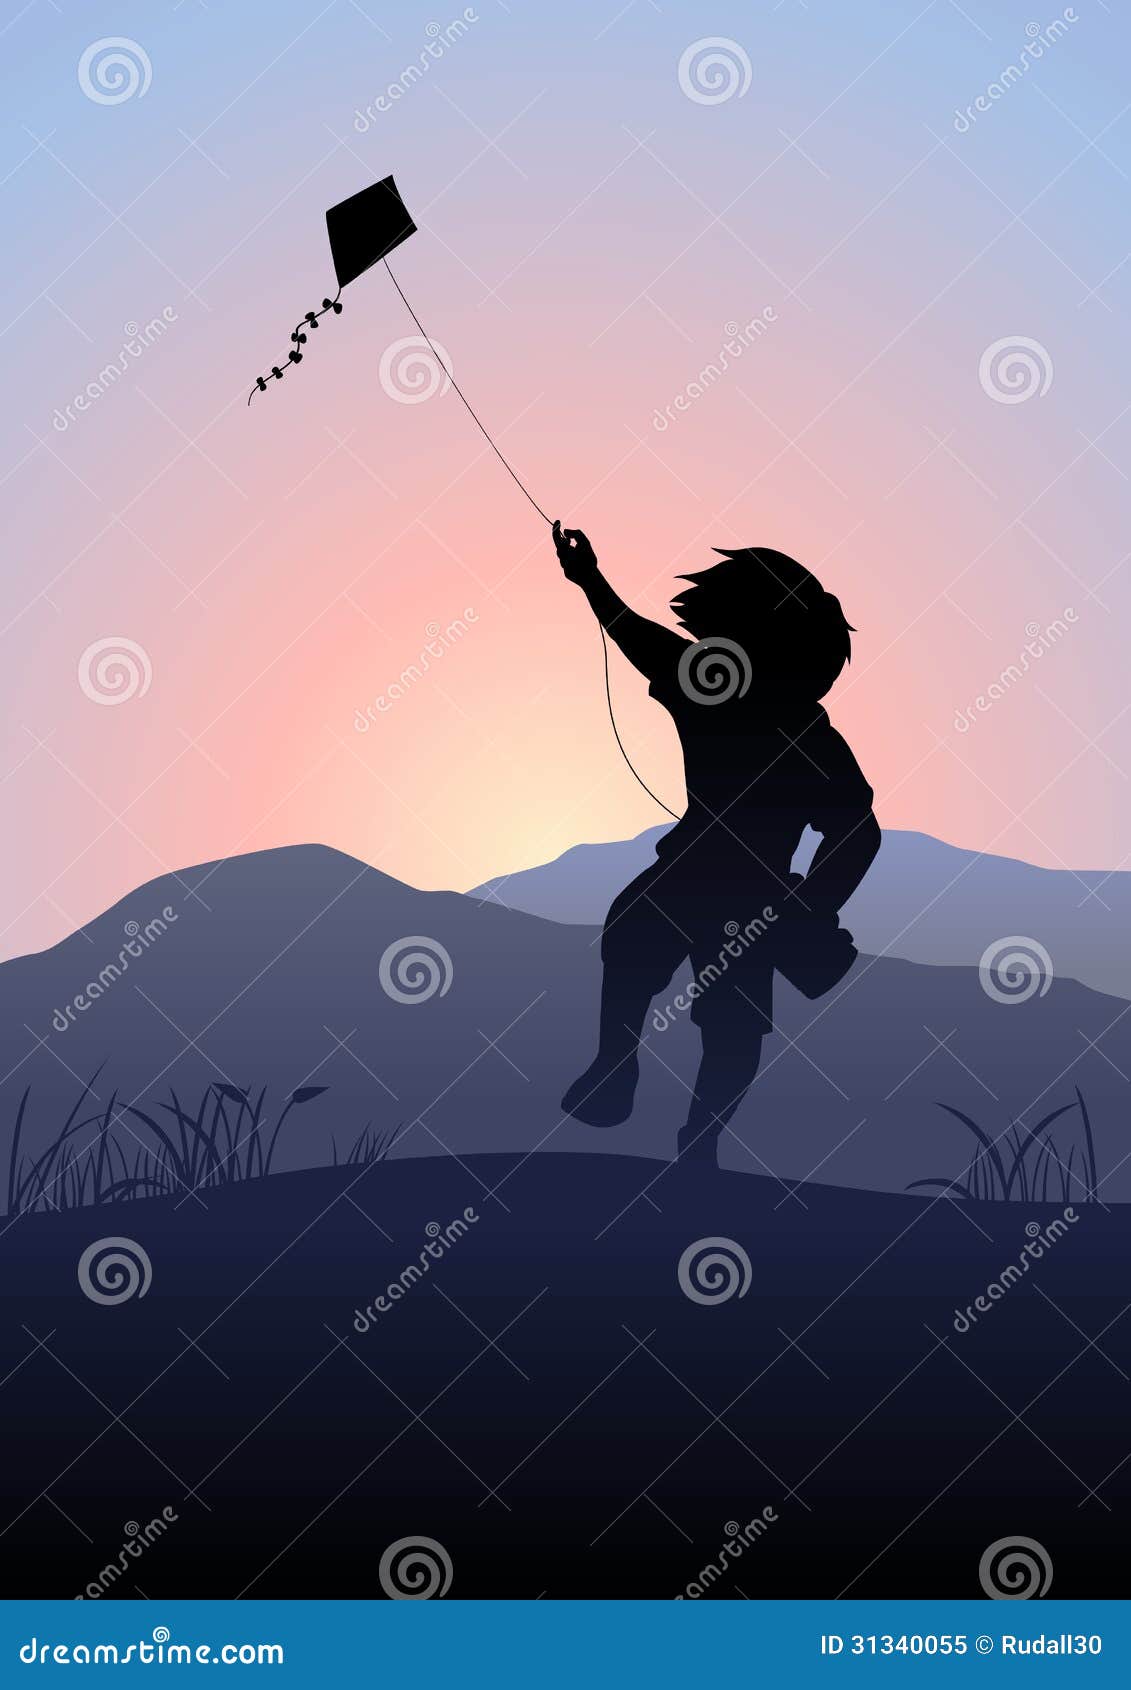 Playing Kite stock vector. Illustration of happiness - 31340055